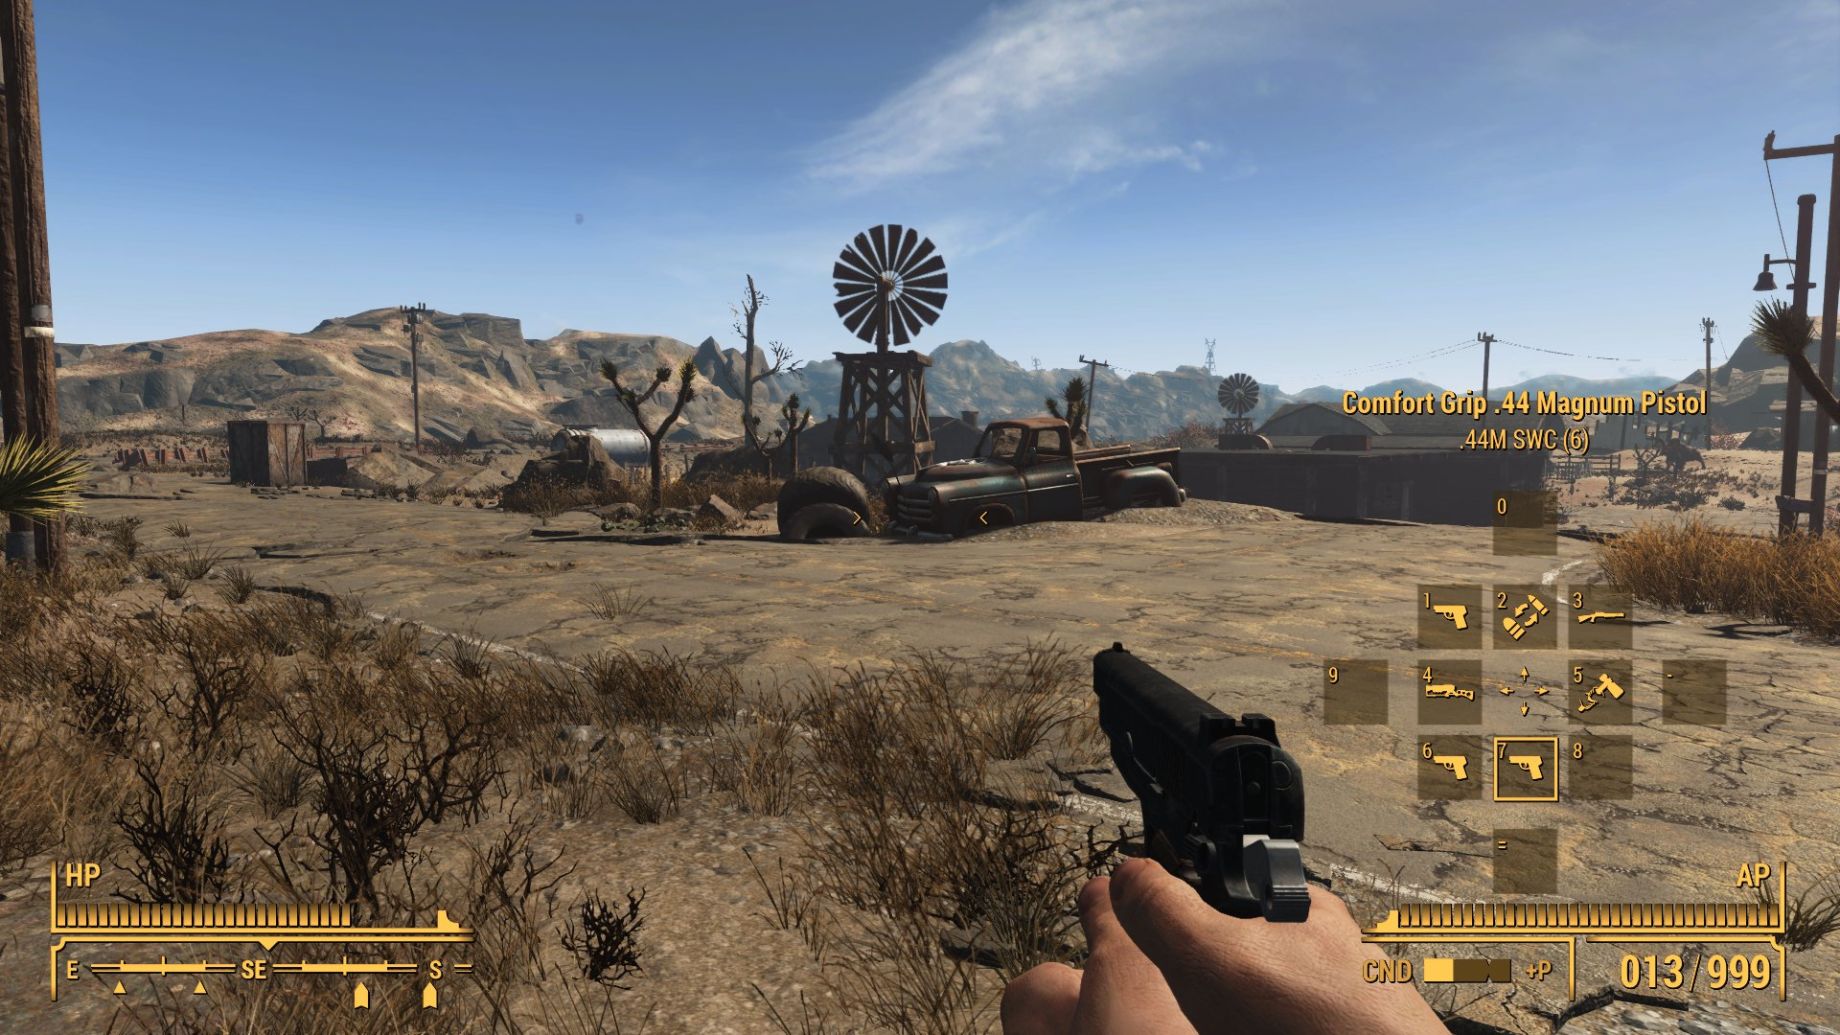 Fallout 4 gets a fan expansion, inspired by Fallout: New Vegas' DLC